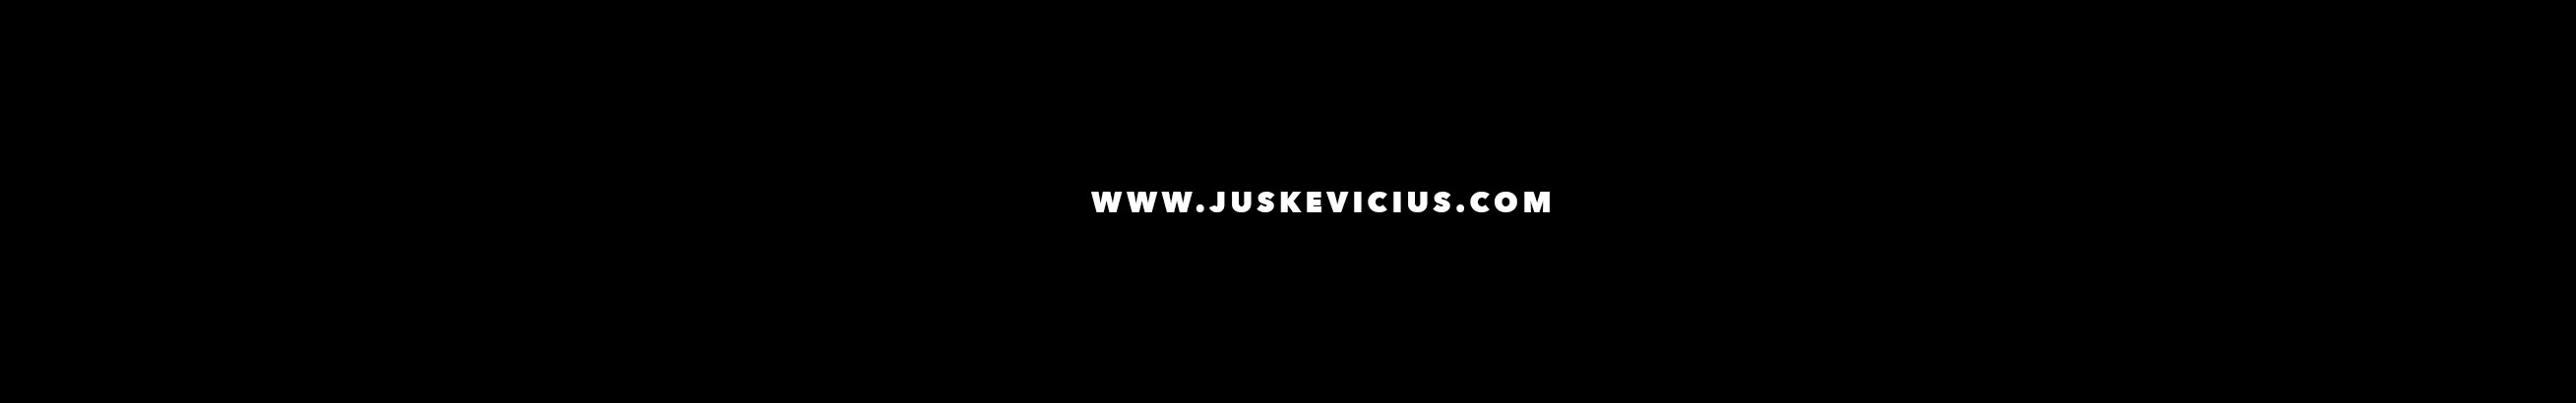 Tom Juskevicius's profile banner